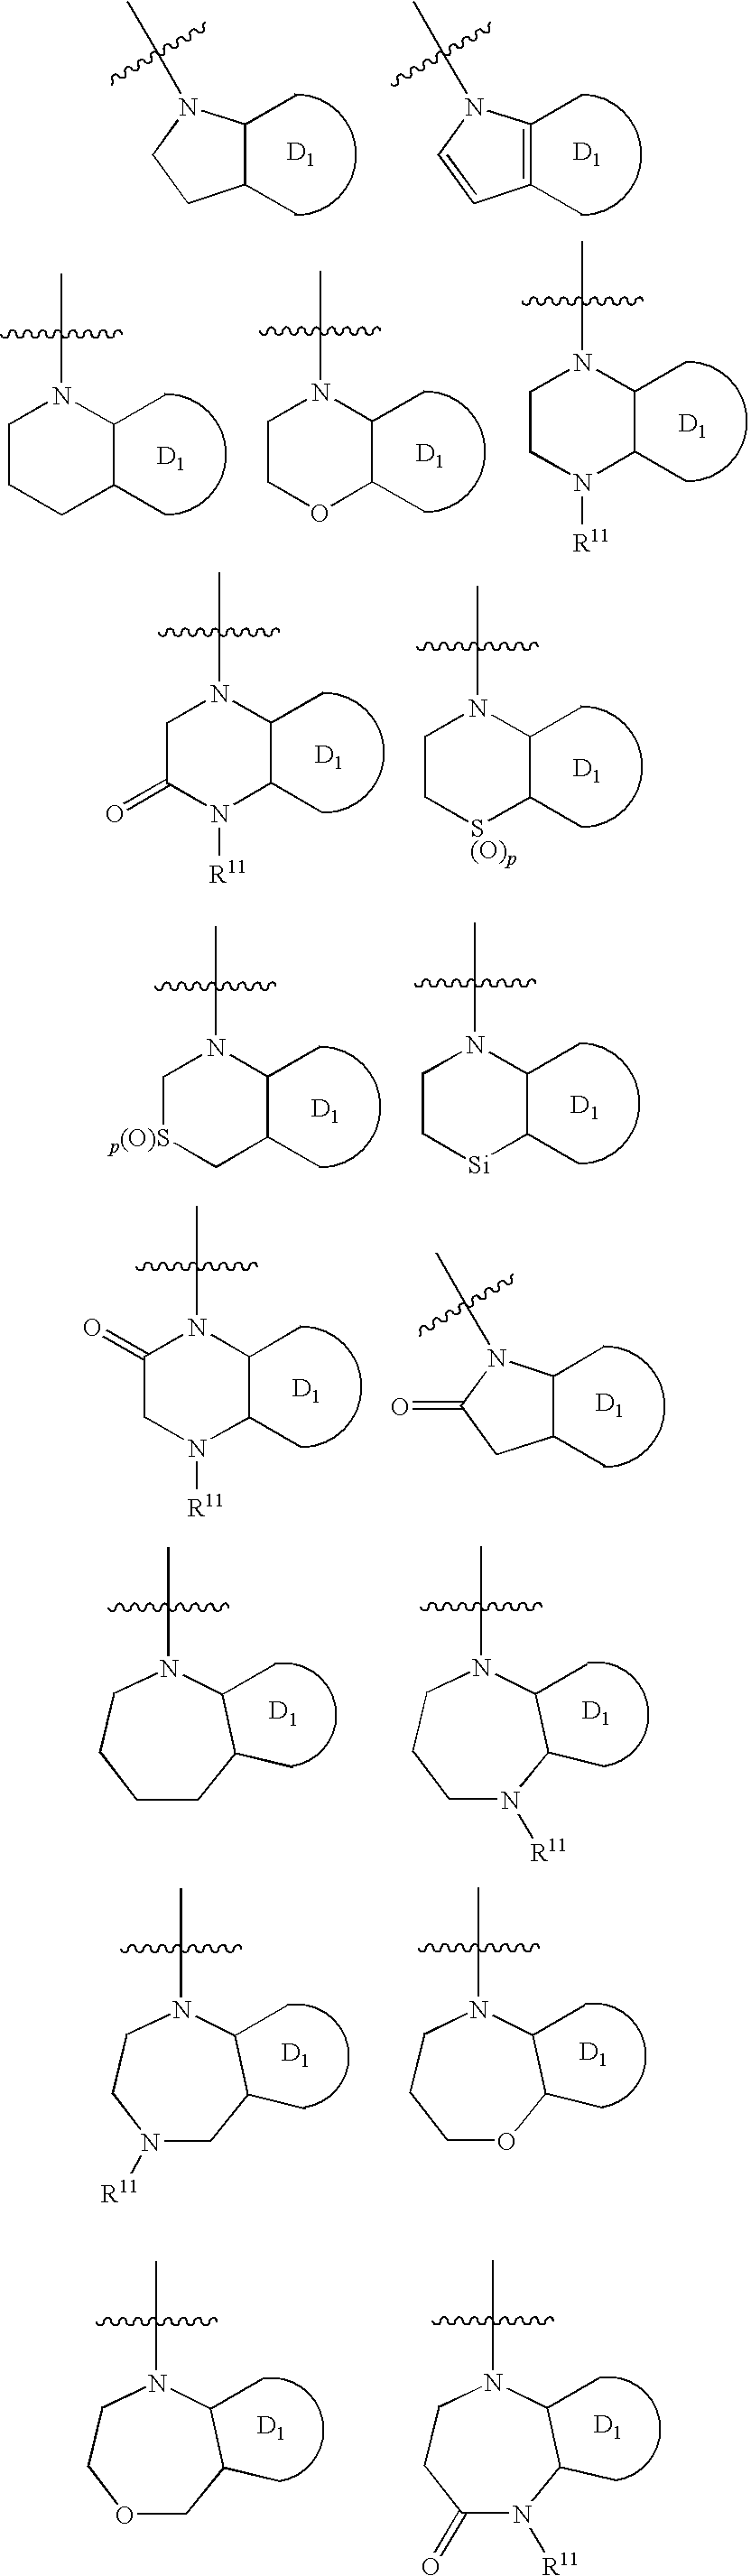 N-linked heterocyclic antagonists of P2Y<sub>1 </sub>receptor useful in the treatment of thrombotic conditions